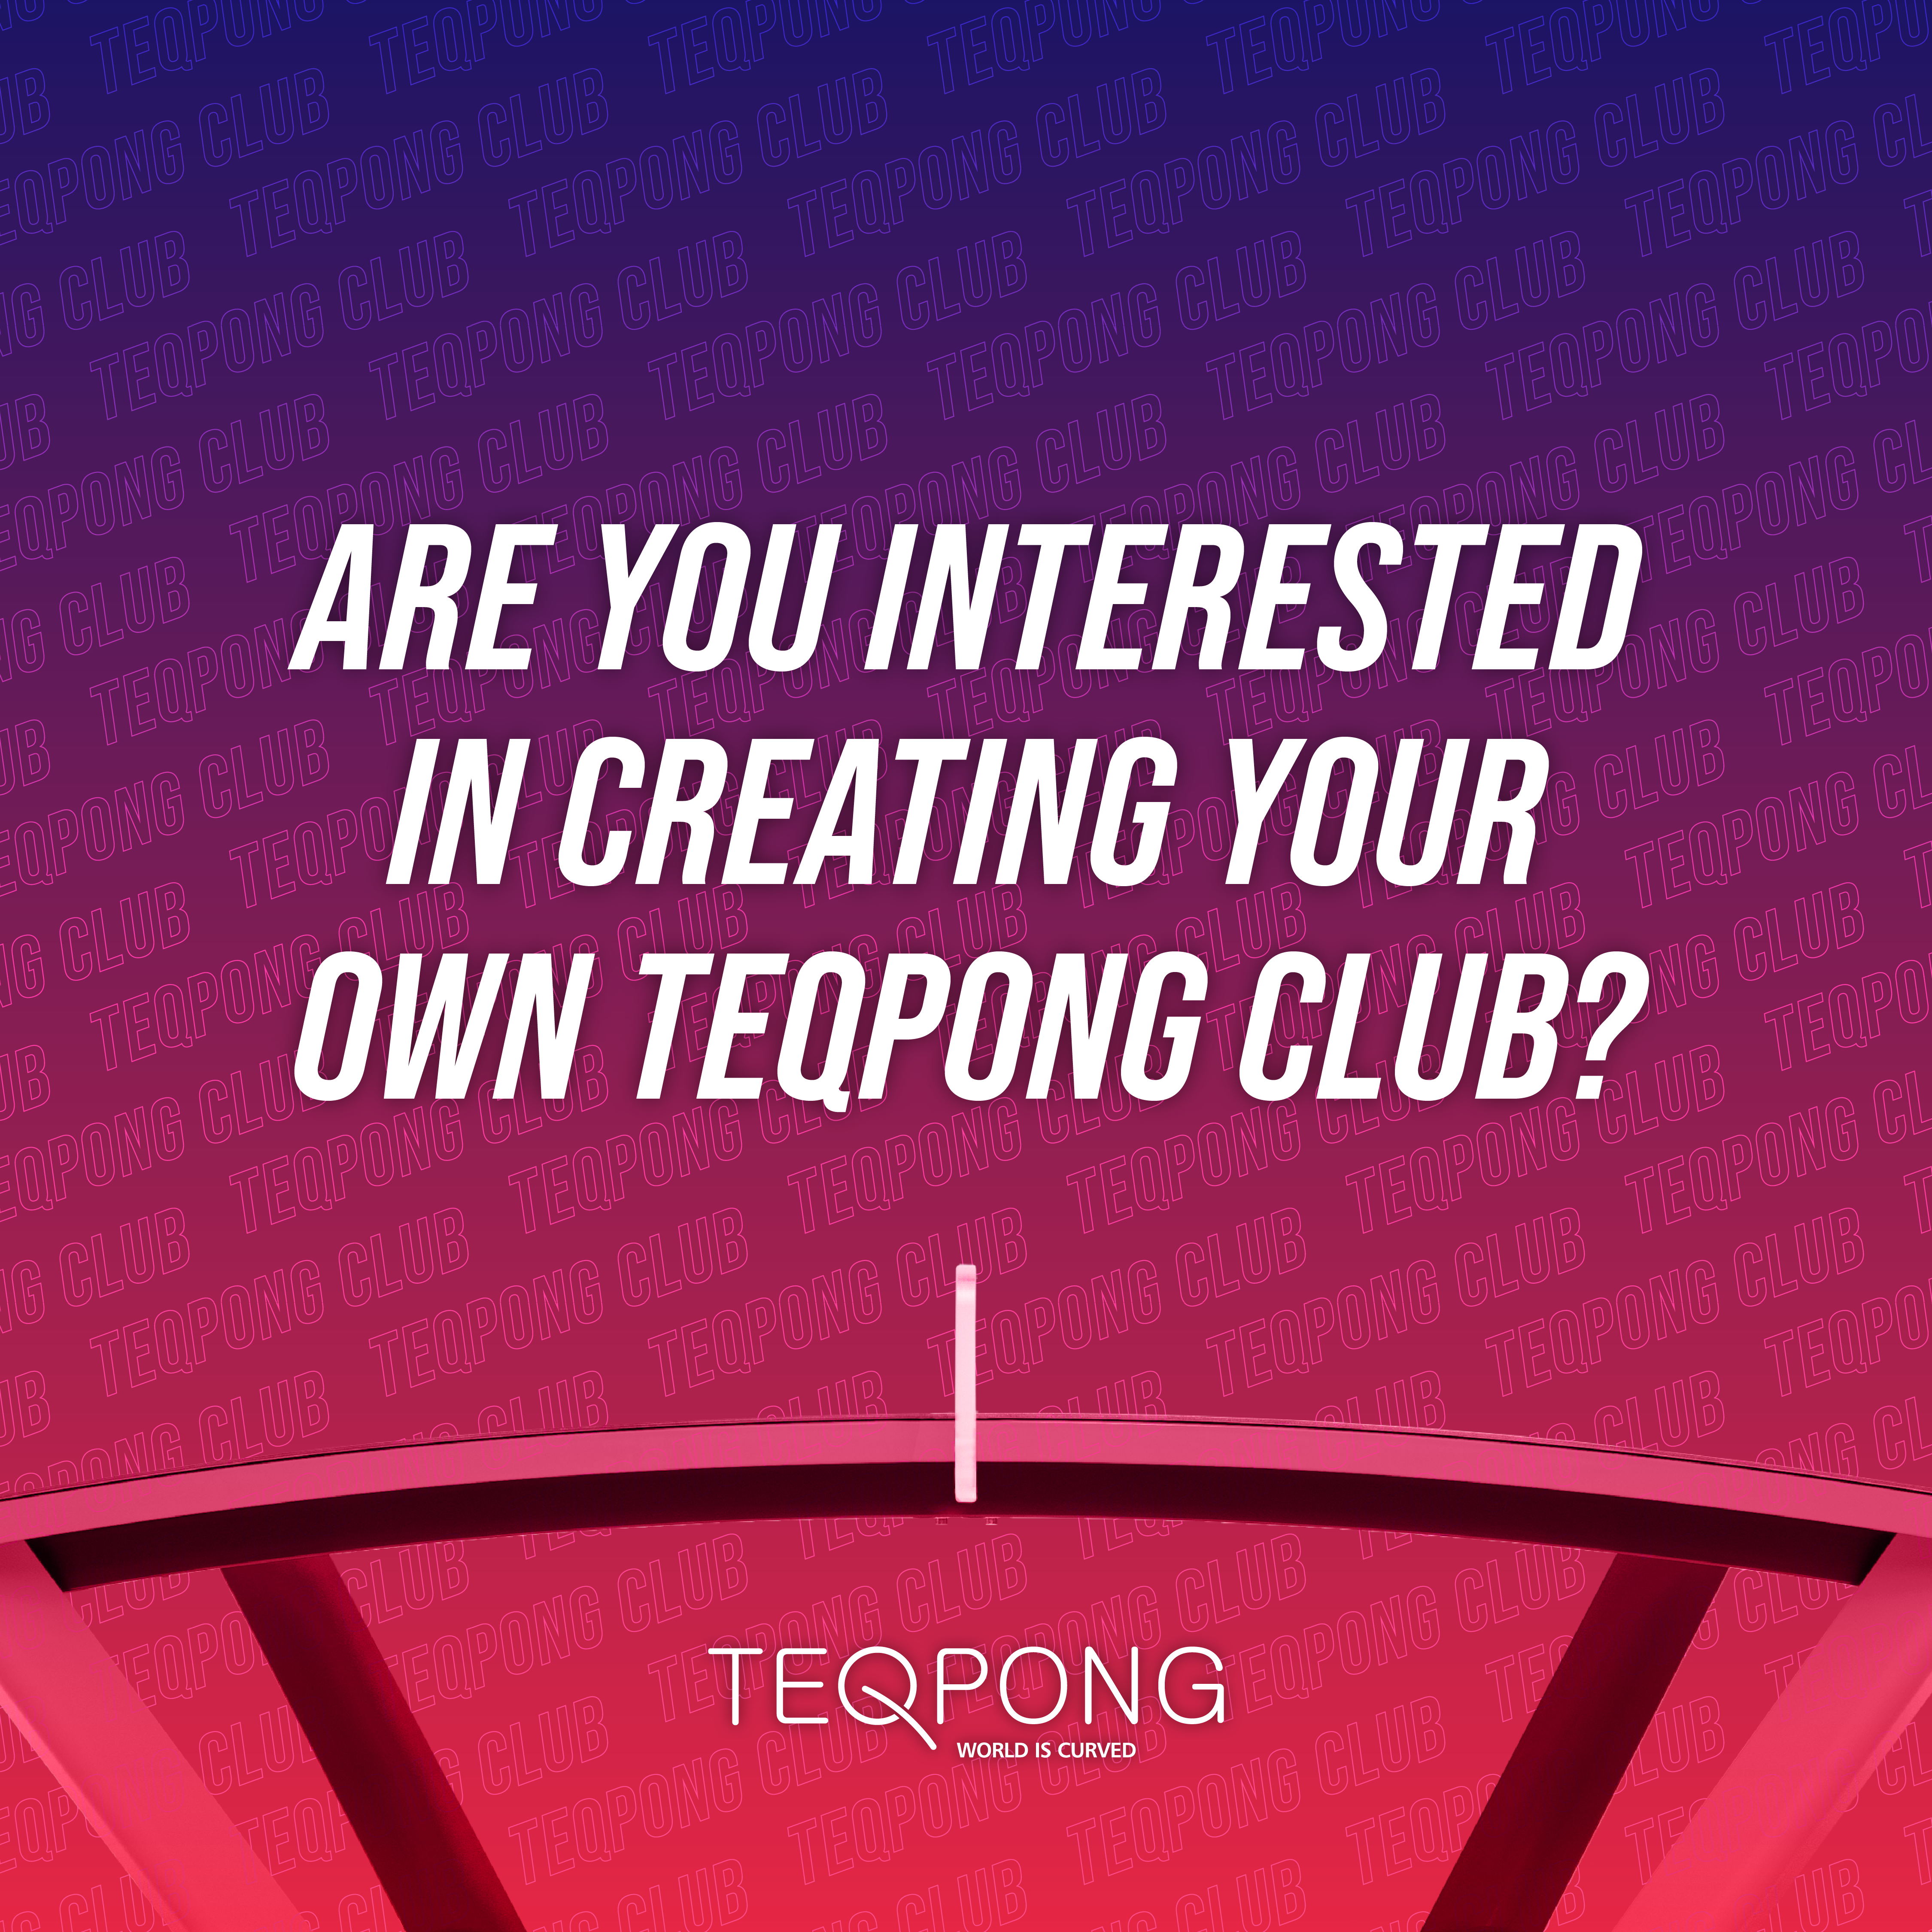 Are you interested in creating a teqpong club?